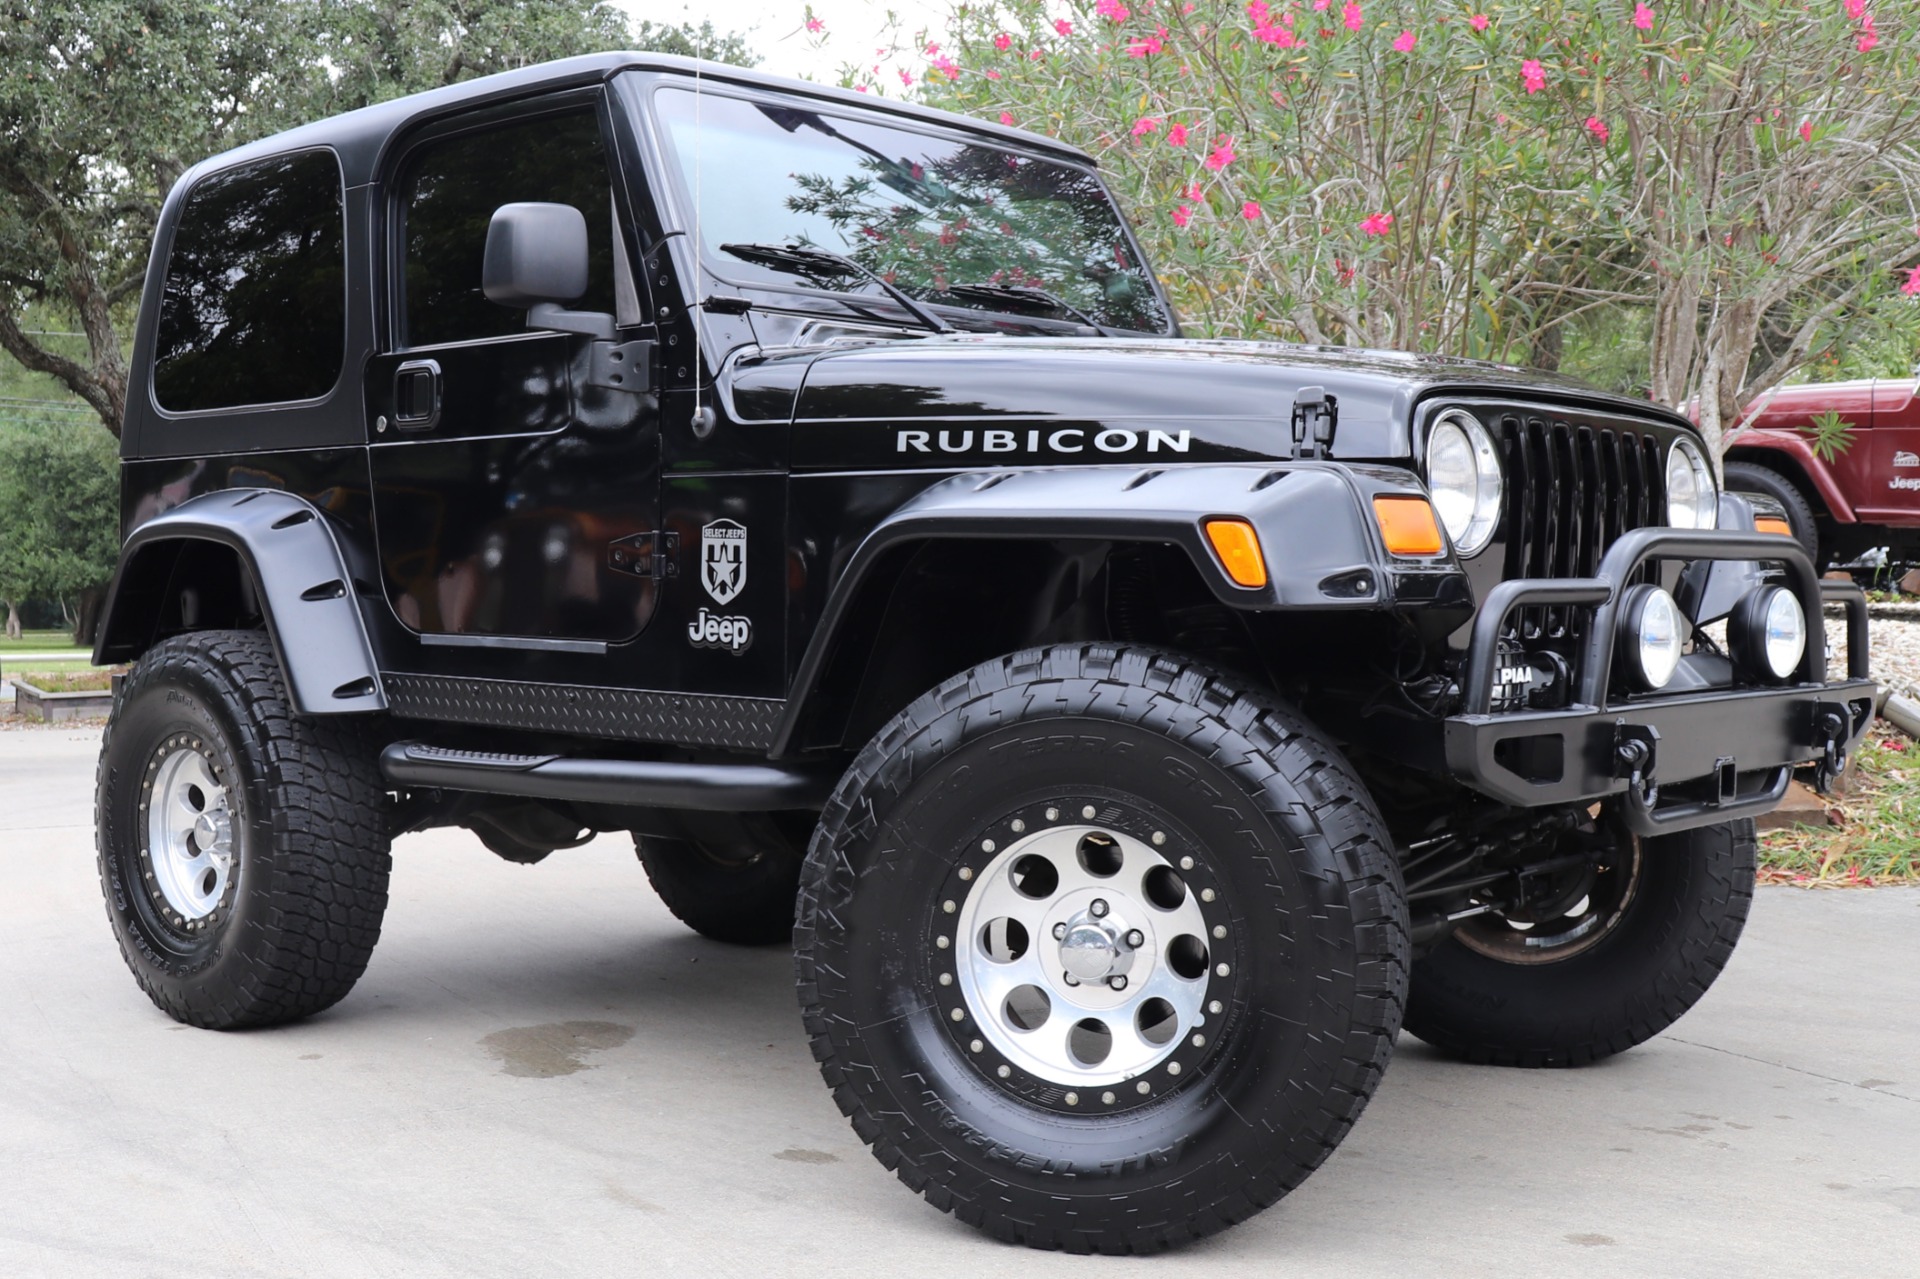 Used 2004 Jeep Wrangler Rubicon For Sale ($27,995) | Select Jeeps Inc.  Stock #779013